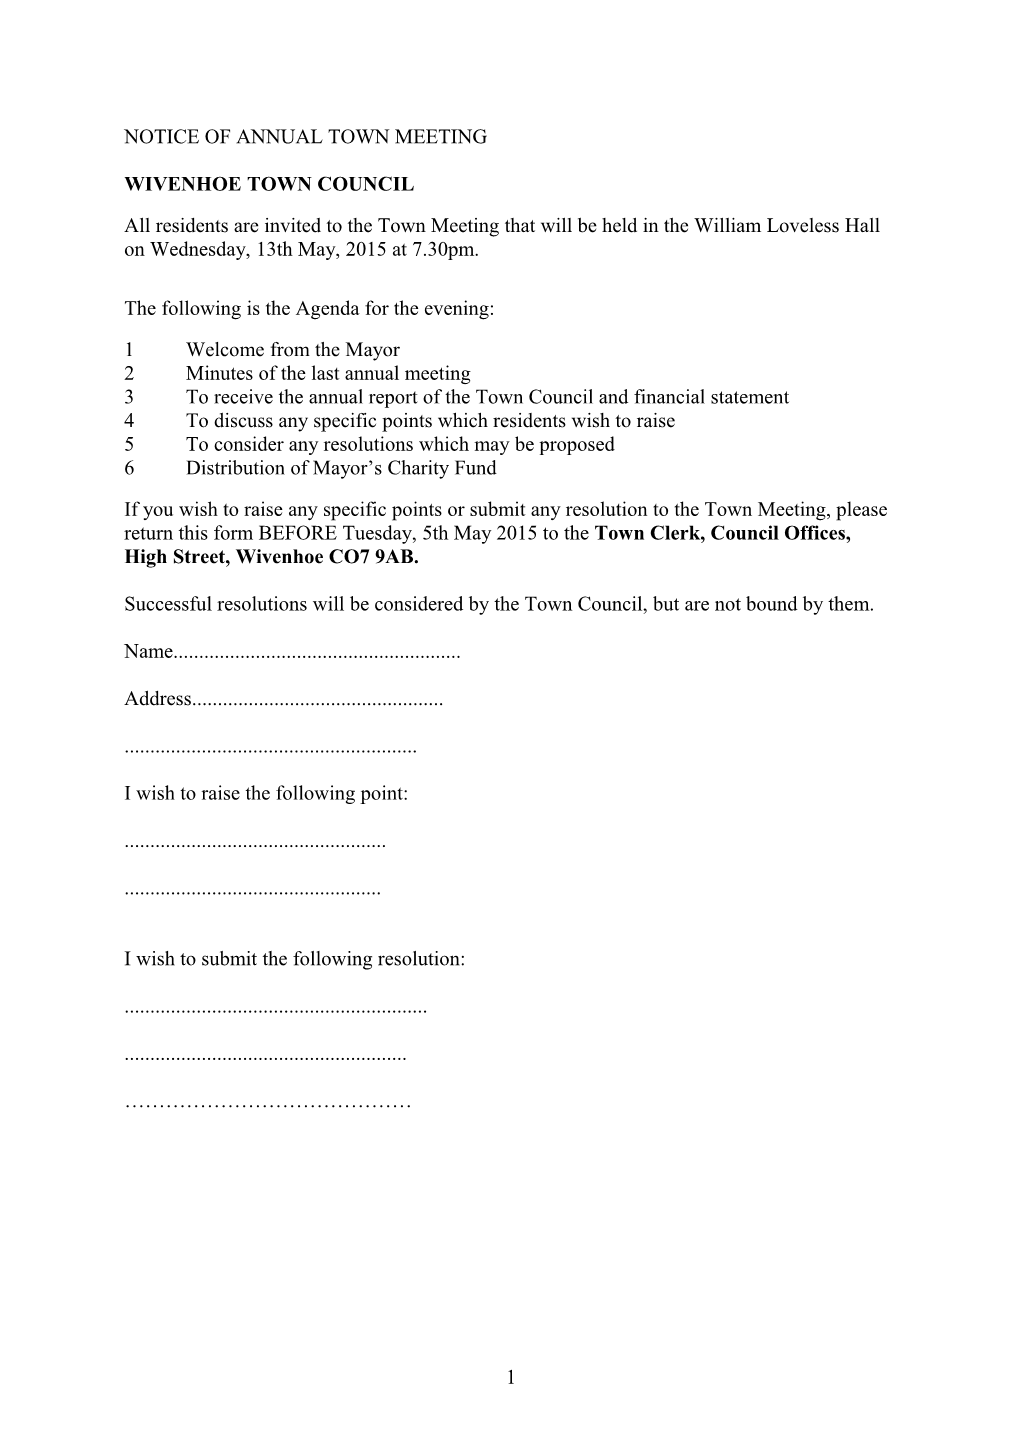 Notice of Annual Town Meeting